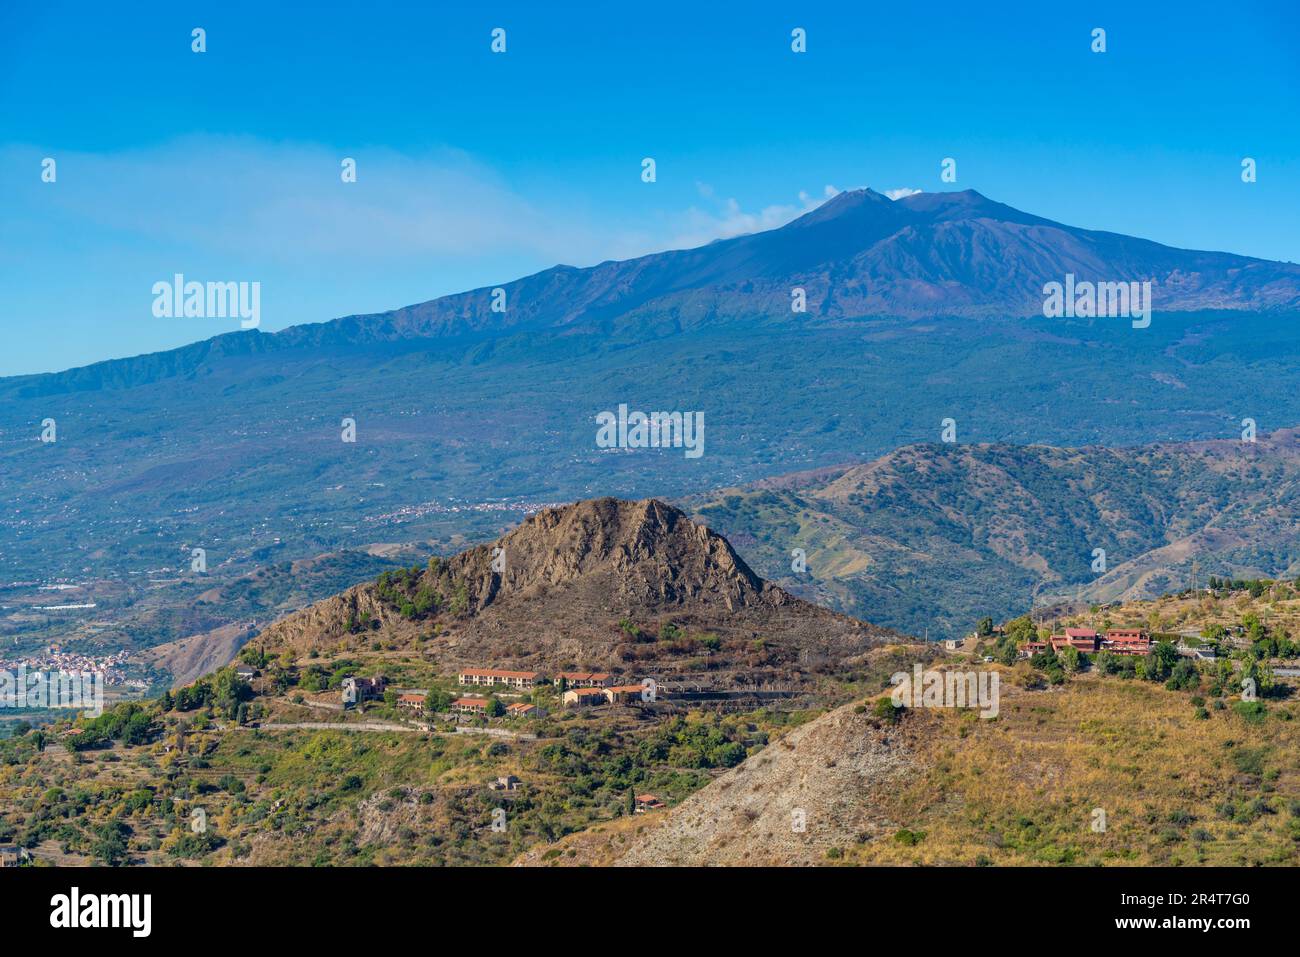 View of landscape with Mount Etna in background from Castelmola, Taormina, Sicily, Italy, Europe Stock Photo